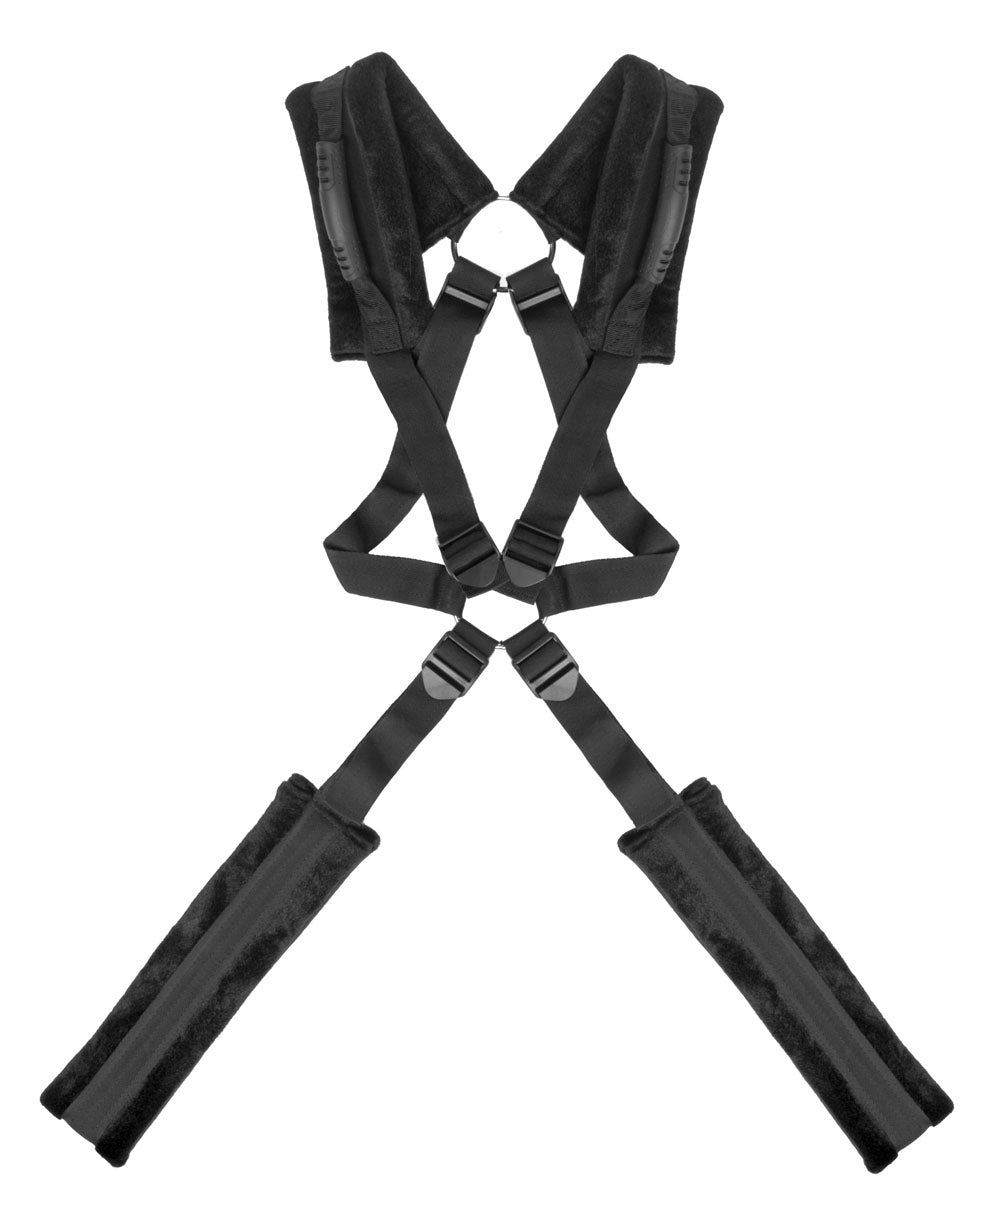 Stand and Deliver Sex Position Body Sling for Couples by Frisky